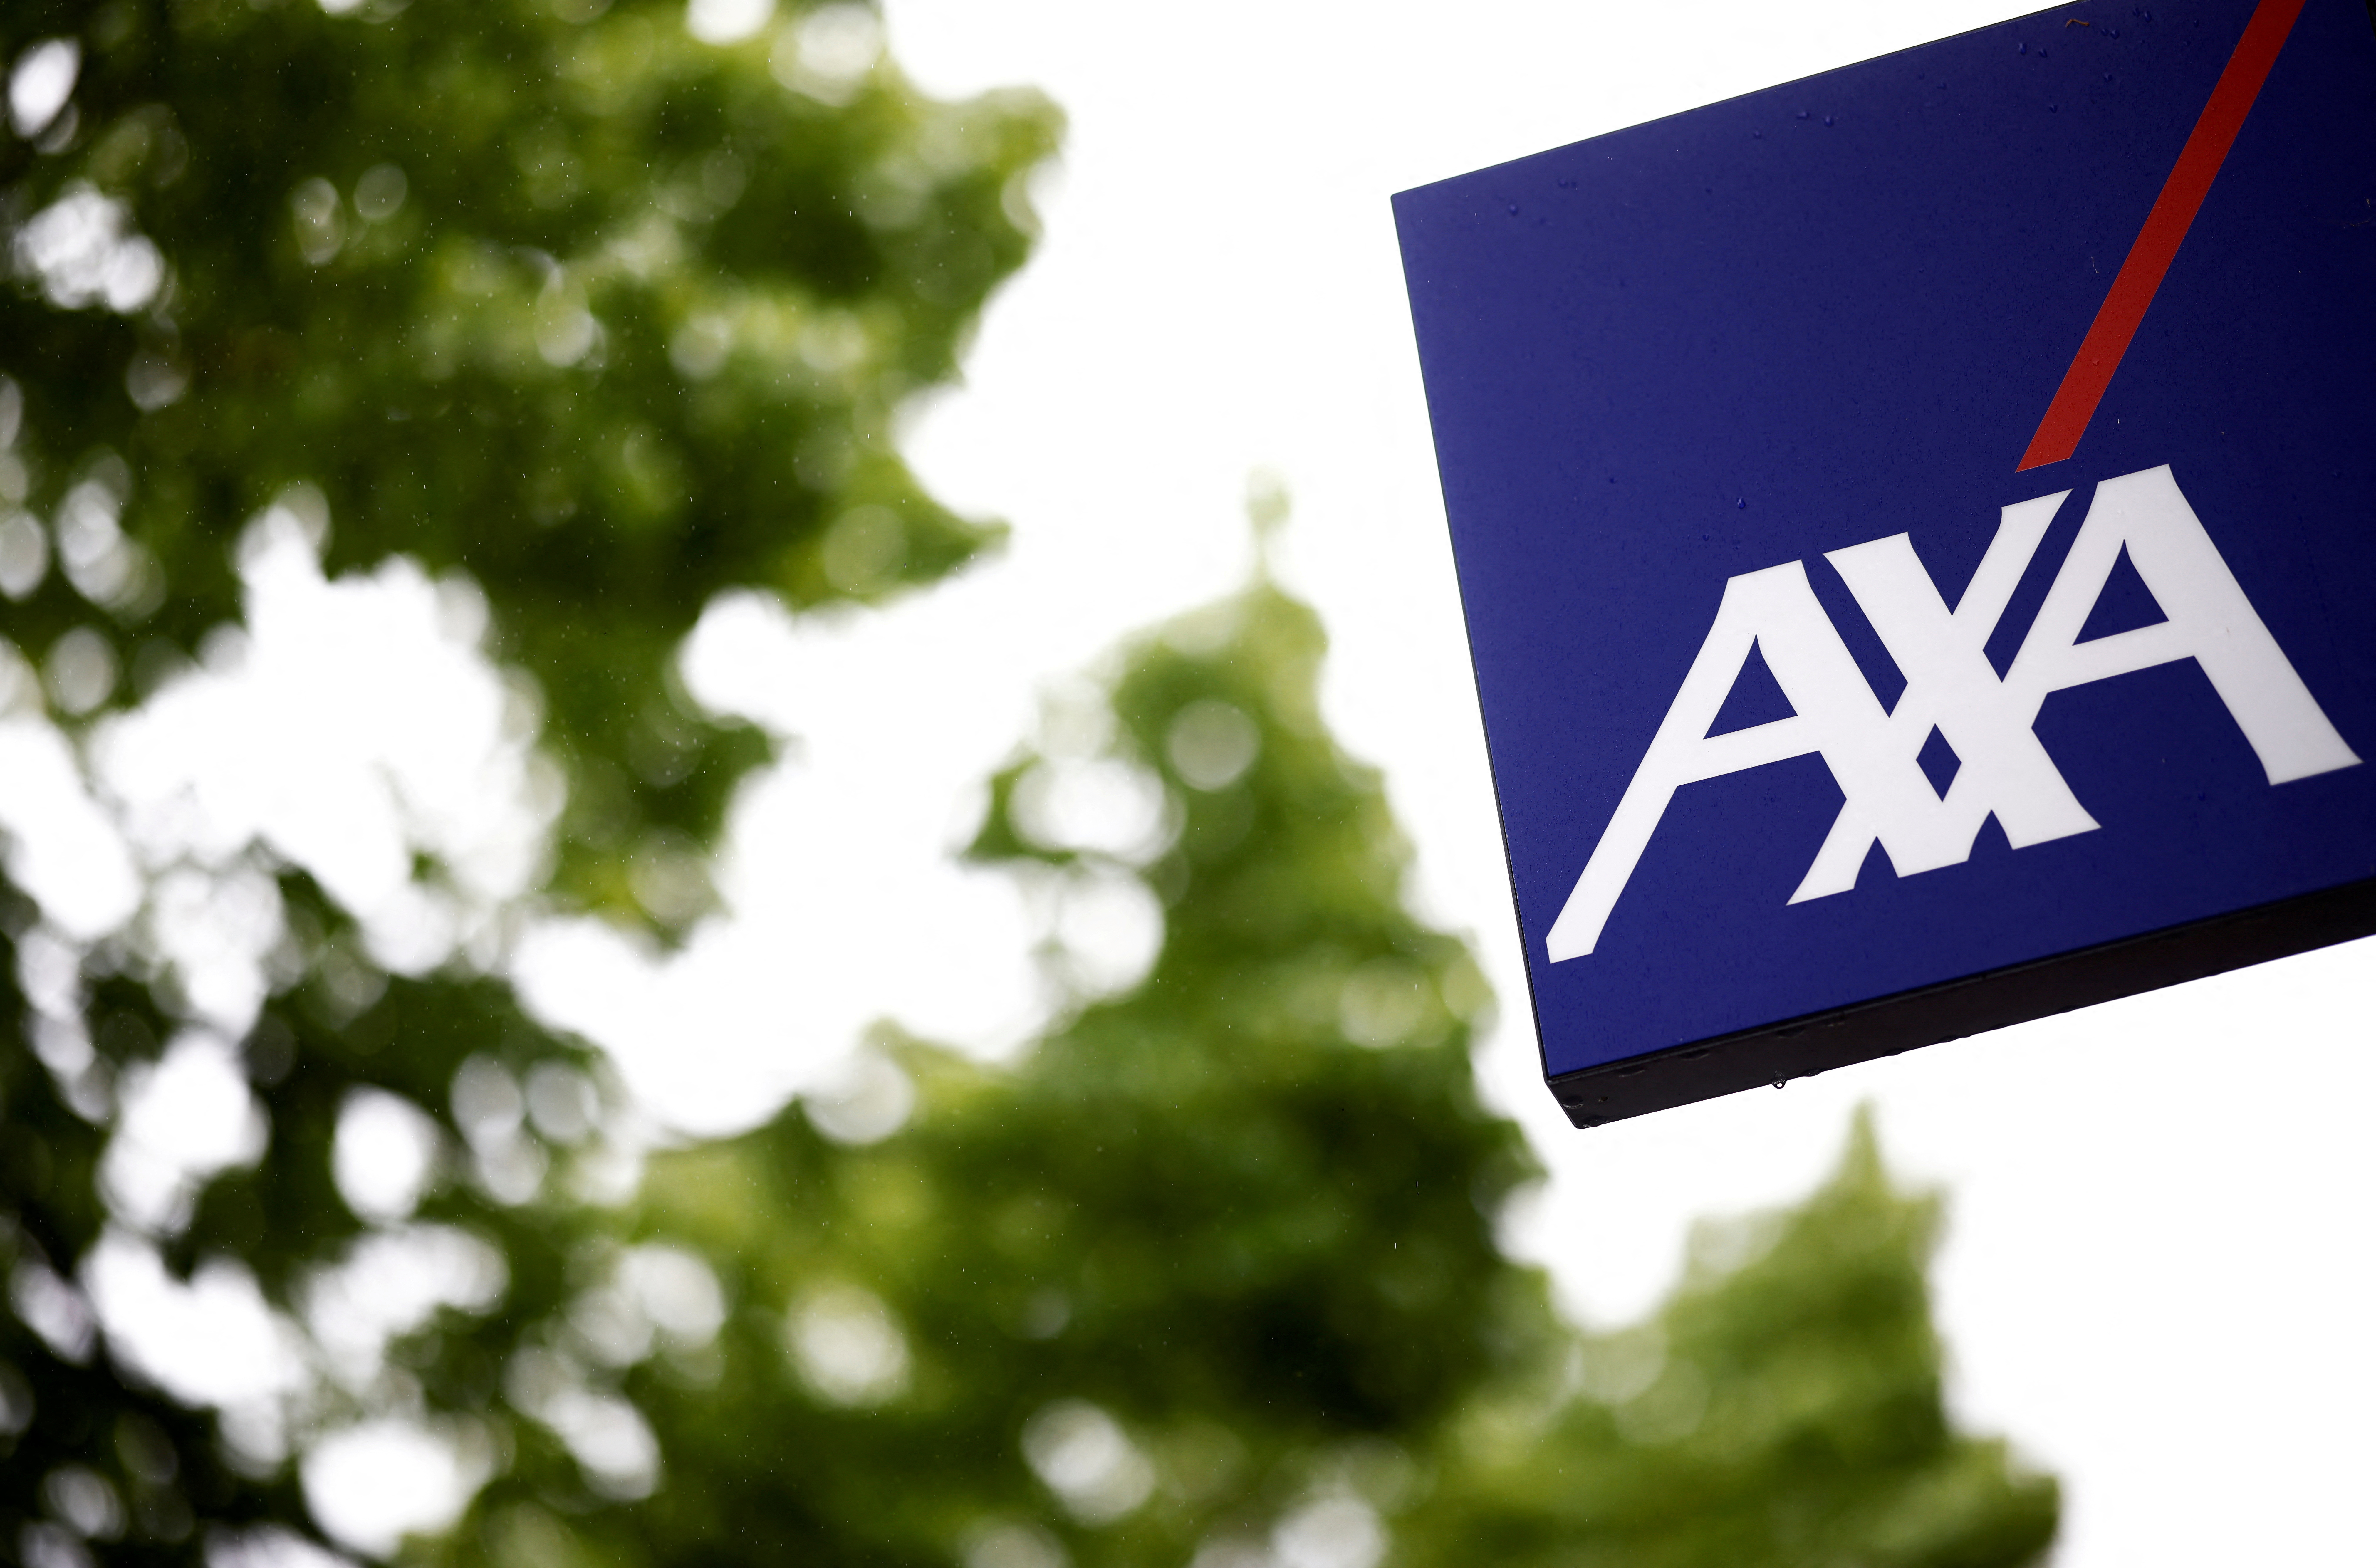 The logo of French Insurer AXA is seen outside a building in Les Sorinieres